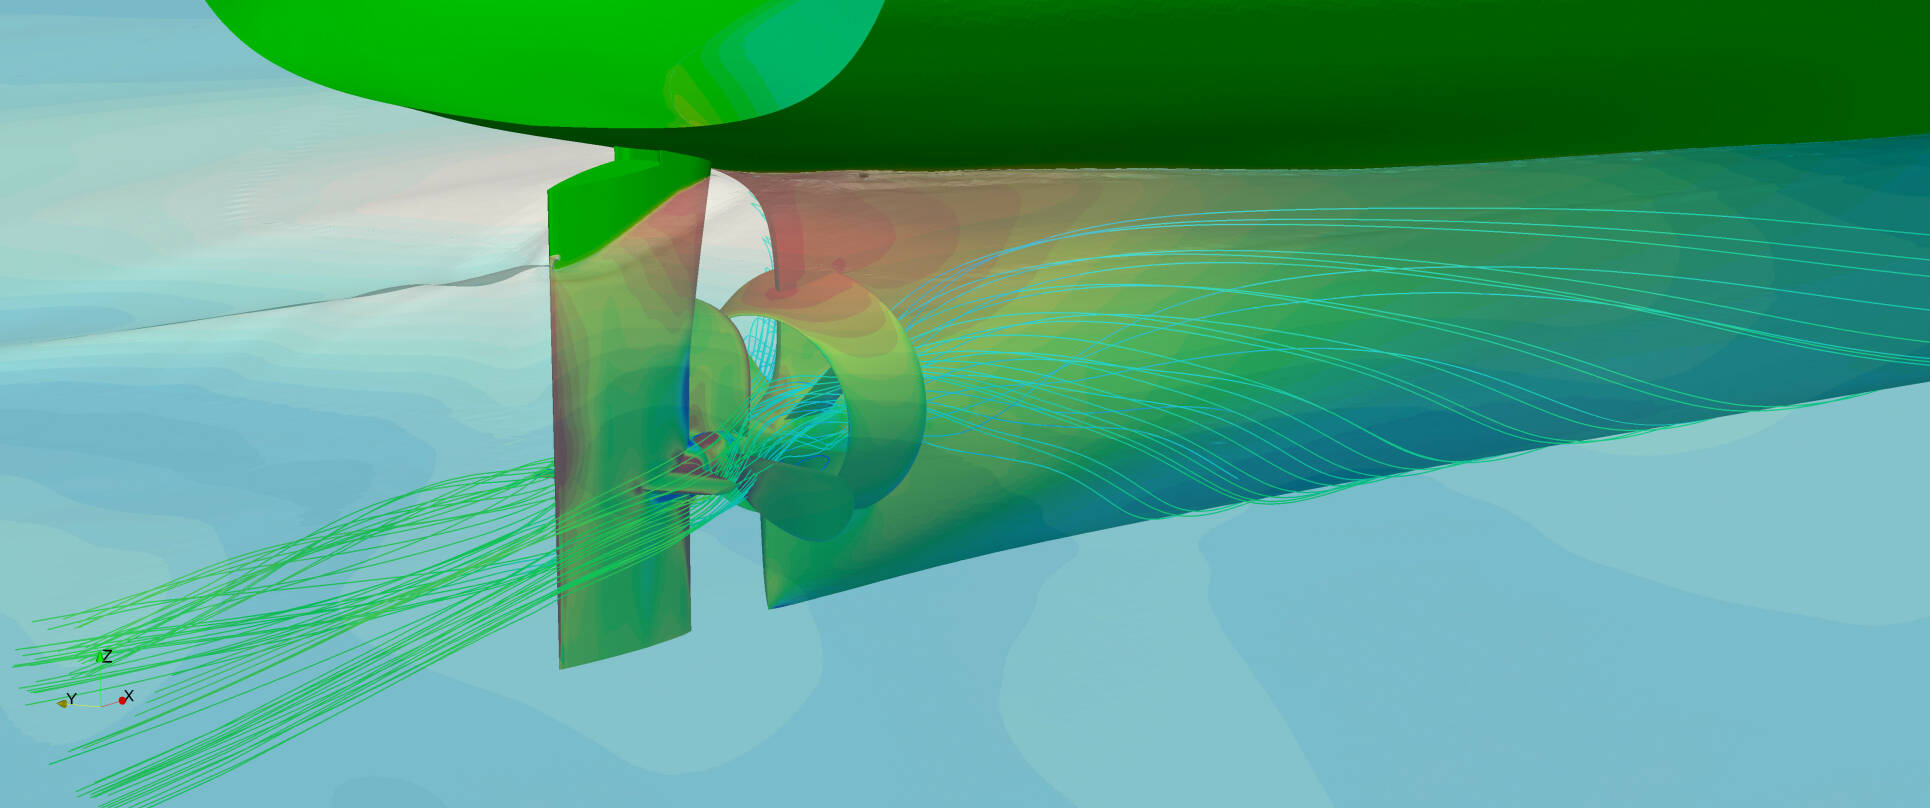 Figure 5. CFD visualisation of the vessel post-retrofit in ballast loading condition.